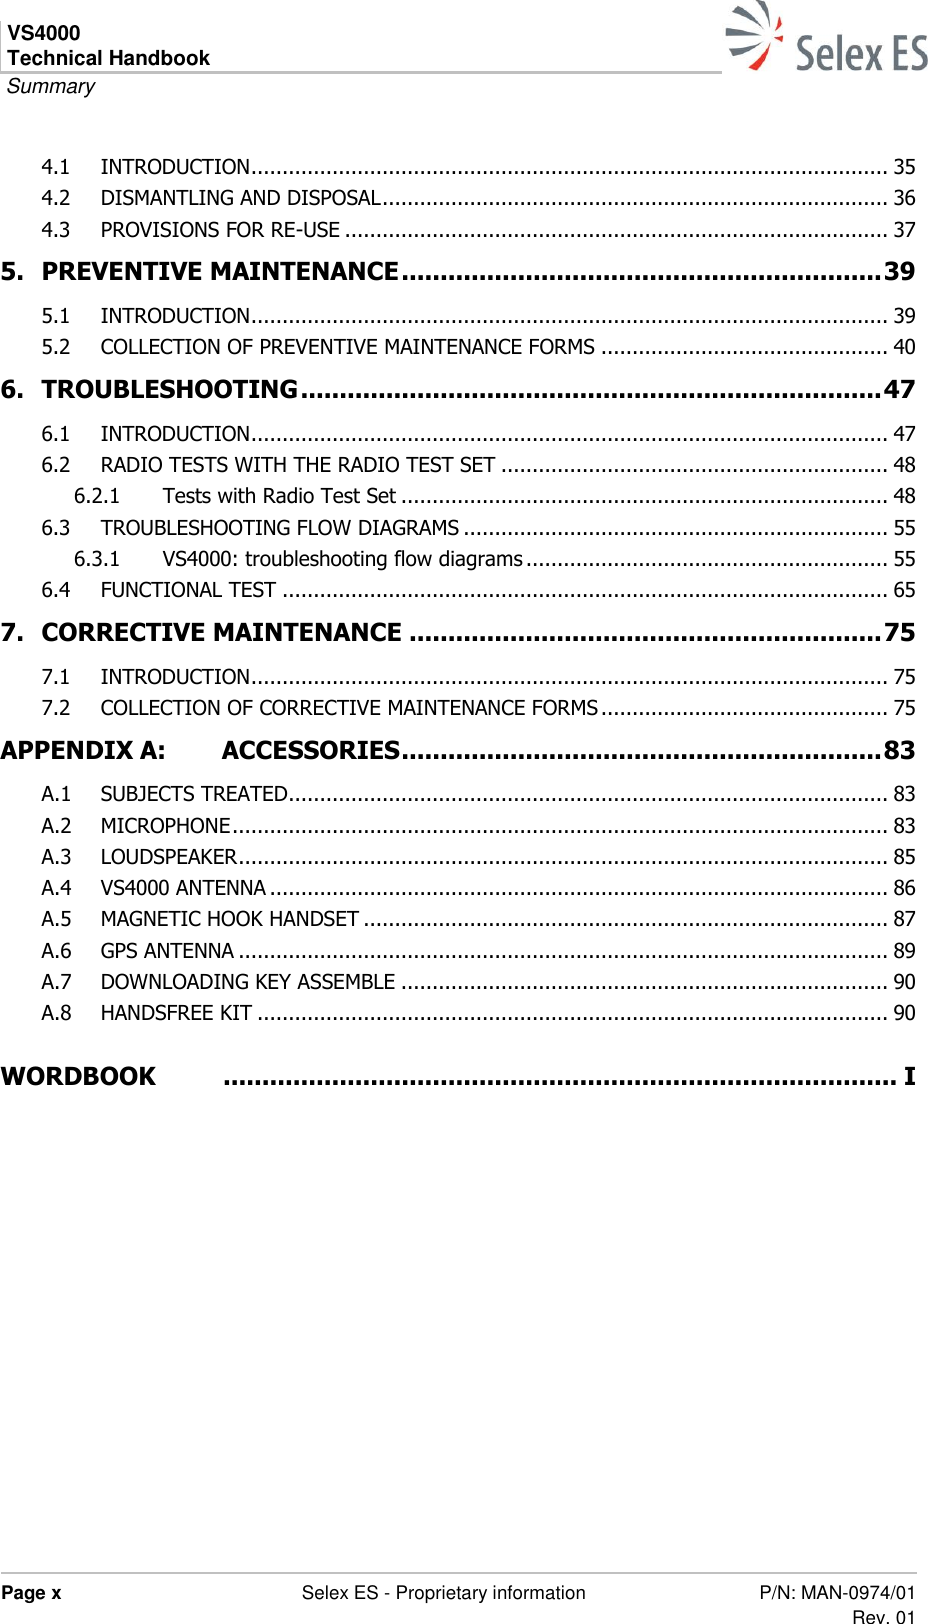 VS4000 Technical Handbook  Summary  Page x  Selex ES - Proprietary information P/N: MAN-0974/01 Rev. 01  4.1 INTRODUCTION ...................................................................................................... 35 4.2 DISMANTLING AND DISPOSAL ................................................................................. 36 4.3 PROVISIONS FOR RE-USE ....................................................................................... 37 5. PREVENTIVE MAINTENANCE .............................................................. 39 5.1 INTRODUCTION ...................................................................................................... 39 5.2 COLLECTION OF PREVENTIVE MAINTENANCE FORMS .............................................. 40 6. TROUBLESHOOTING ........................................................................... 47 6.1 INTRODUCTION ...................................................................................................... 47 6.2 RADIO TESTS WITH THE RADIO TEST SET .............................................................. 48 6.2.1 Tests with Radio Test Set .............................................................................. 48 6.3 TROUBLESHOOTING FLOW DIAGRAMS .................................................................... 55 6.3.1 VS4000: troubleshooting flow diagrams .......................................................... 55 6.4 FUNCTIONAL TEST ................................................................................................. 65 7. CORRECTIVE MAINTENANCE ............................................................. 75 7.1 INTRODUCTION ...................................................................................................... 75 7.2 COLLECTION OF CORRECTIVE MAINTENANCE FORMS .............................................. 75 APPENDIX A: ACCESSORIES .............................................................. 83 A.1 SUBJECTS TREATED ................................................................................................ 83 A.2 MICROPHONE ......................................................................................................... 83 A.3 LOUDSPEAKER ........................................................................................................ 85 A.4 VS4000 ANTENNA ................................................................................................... 86 A.5 MAGNETIC HOOK HANDSET .................................................................................... 87 A.6 GPS ANTENNA ........................................................................................................ 89 A.7 DOWNLOADING KEY ASSEMBLE .............................................................................. 90 A.8 HANDSFREE KIT ..................................................................................................... 90  WORDBOOK   ....................................................................................... I  